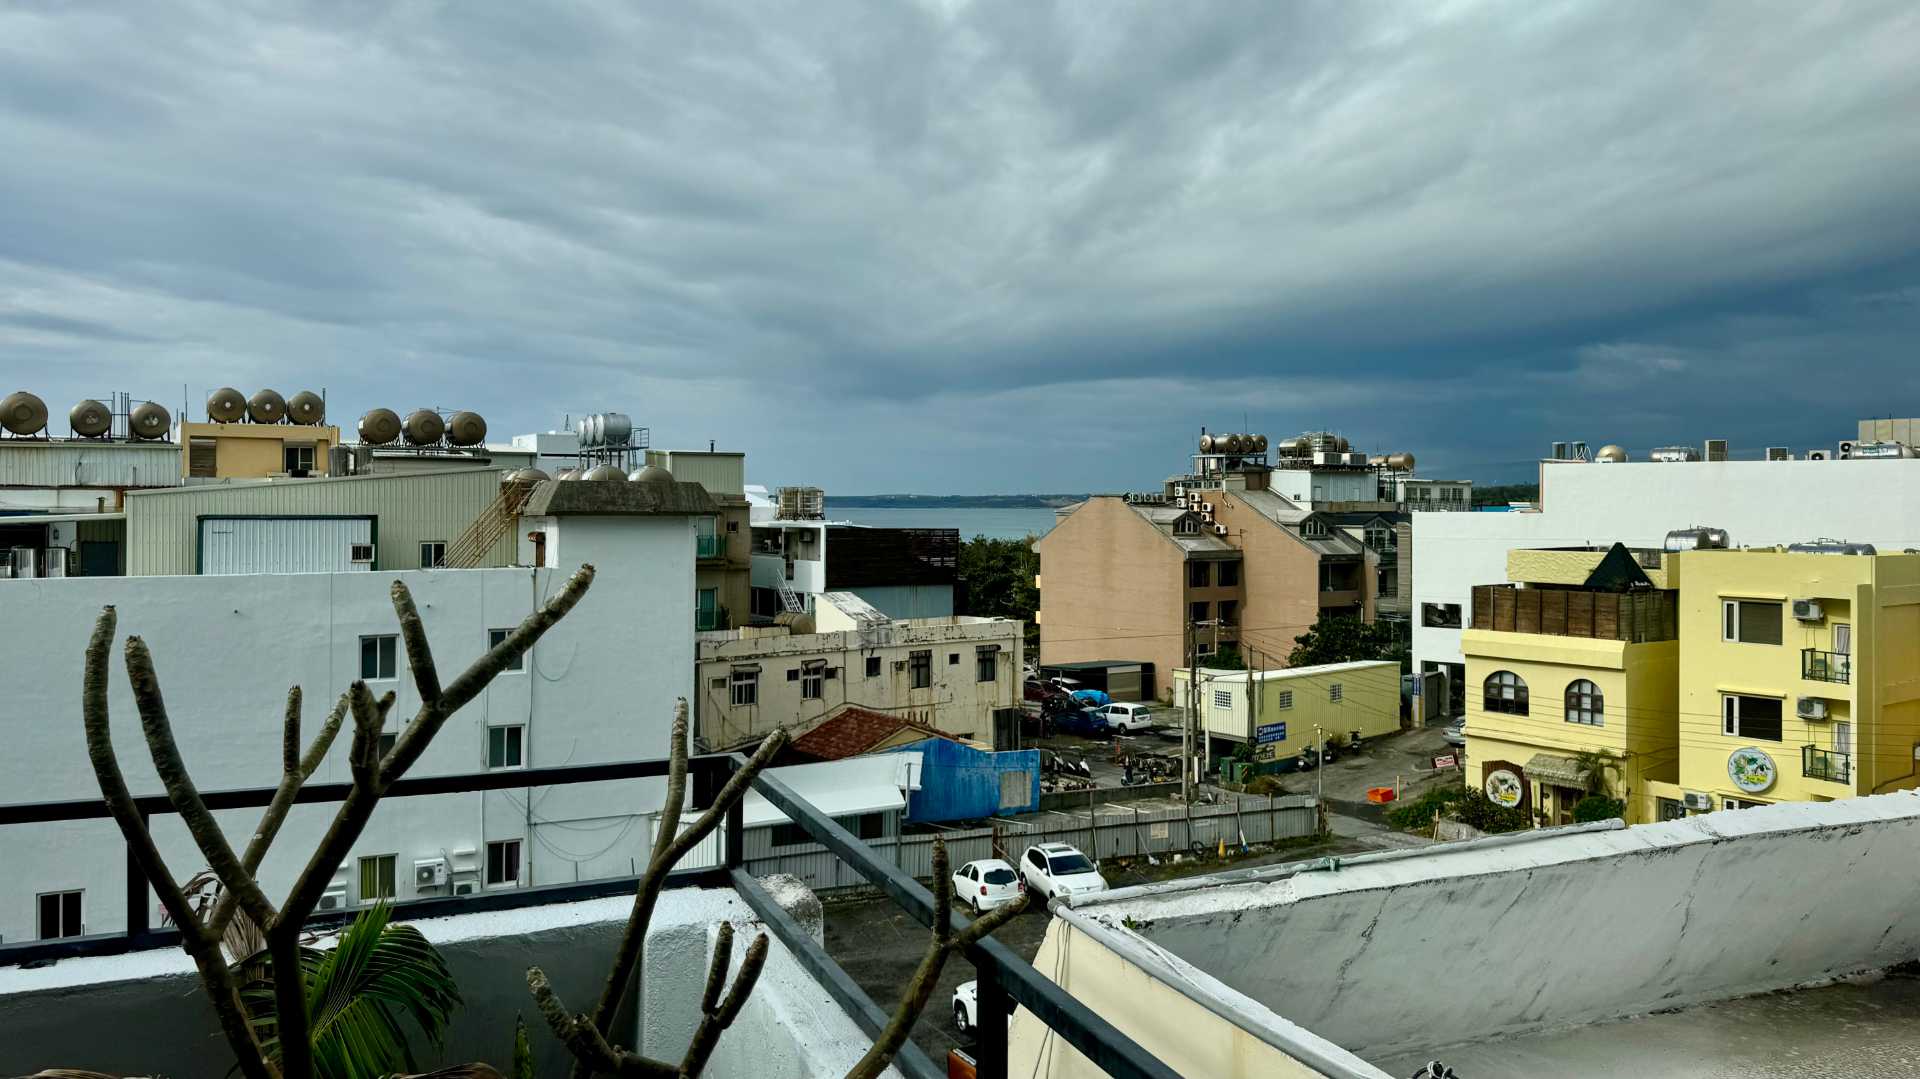 Looking over the rooftops of Kenting Township. The bay is visible in the distance. The sky is coudy.